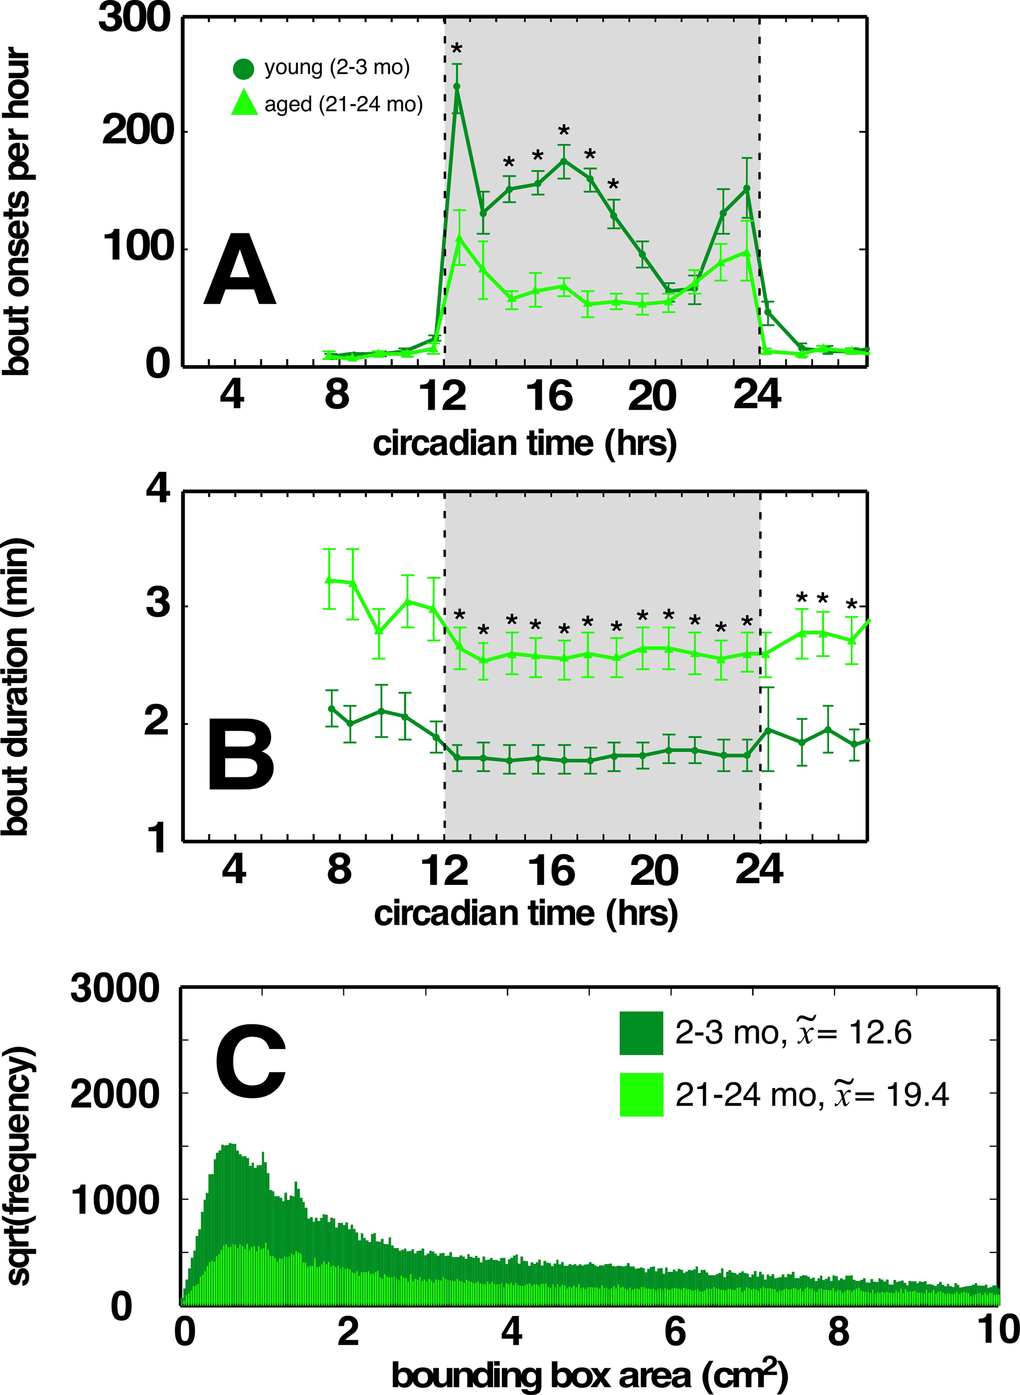 Aged C57BL/6 mice have fewer locomotor bouts during the dark cycle, and a greater proportion of weaving locomotor bouts compared to young cohorts. (A) Aged C57BL/6 mice display fewer bouts of dark cycle locomotion compared to young cohort. (B) Increased locomotor bout durations in aged C57BL/6 mice. (C) Distribution of minimum bounding rectangle areas (MBRs; cut off at 10 to better show small rectangle areas) for locomotor bouts of young and aged C57BL/6 mice. Smaller MBRs indicate more direct locomotor paths. Median values for each cohort in legend. Traces in light green correspond to aged mice, dark green correspond to young mice. Greyed region depicts dark cycle, dashed lines indicate dark cycle onset and offset, respectively. Asterisks indicate p